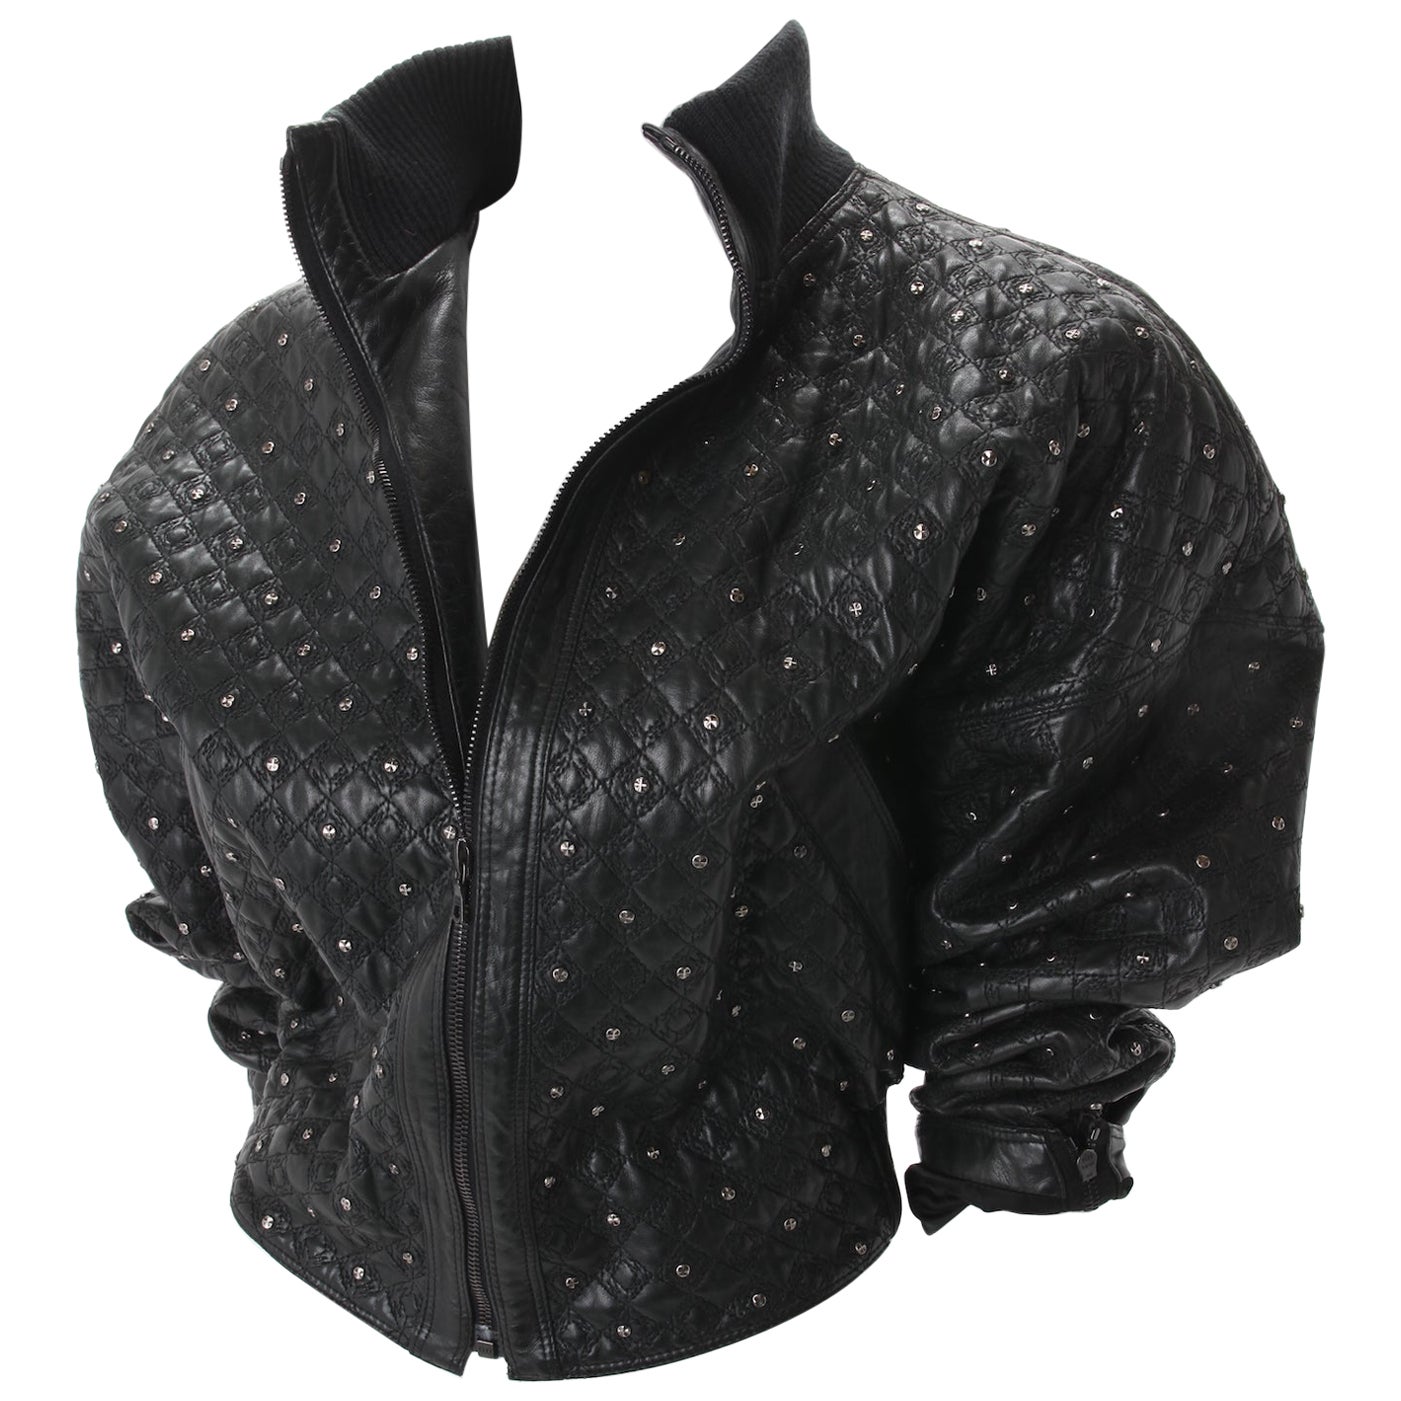 Gianni Versace Black Quilted Leather Bomber Jacket with studs, c.1990s.